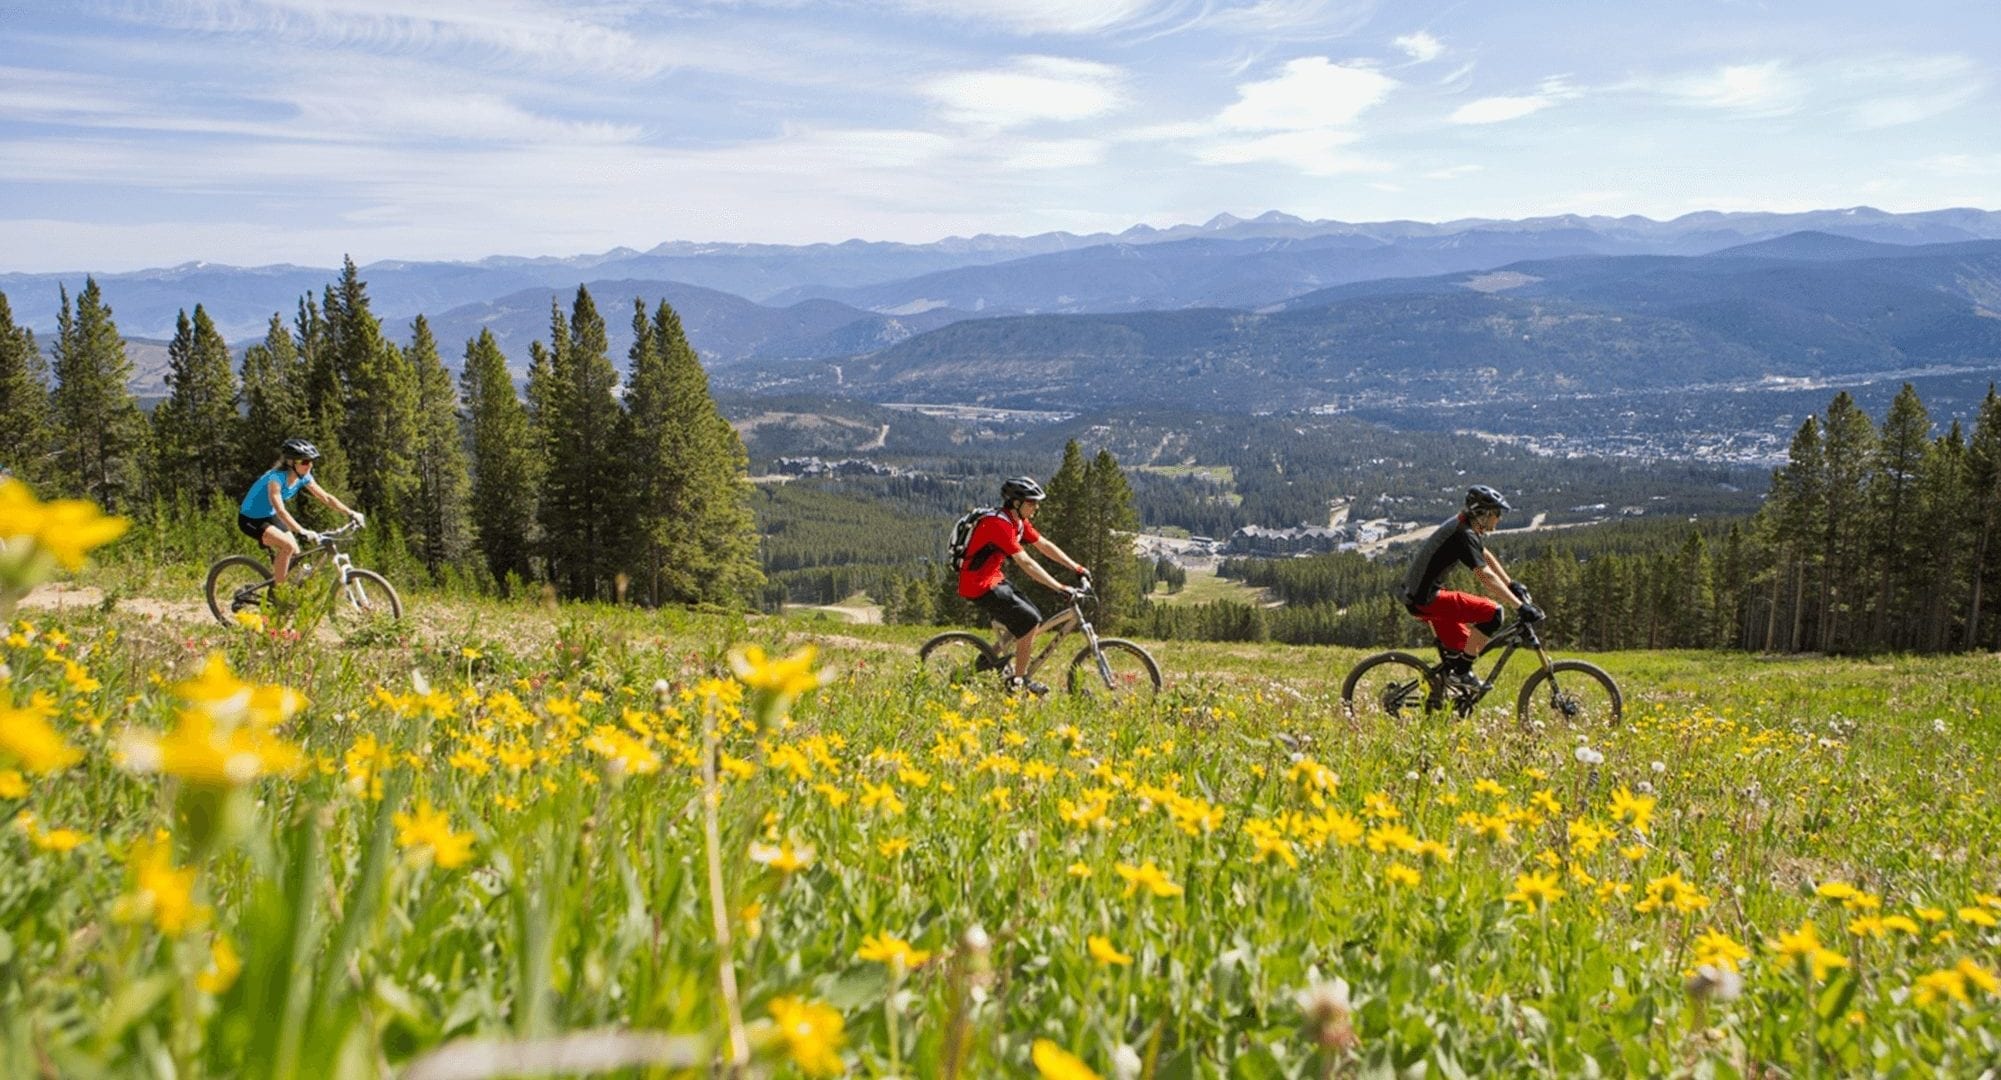 A group mountain biking through a field with yellow flowers 